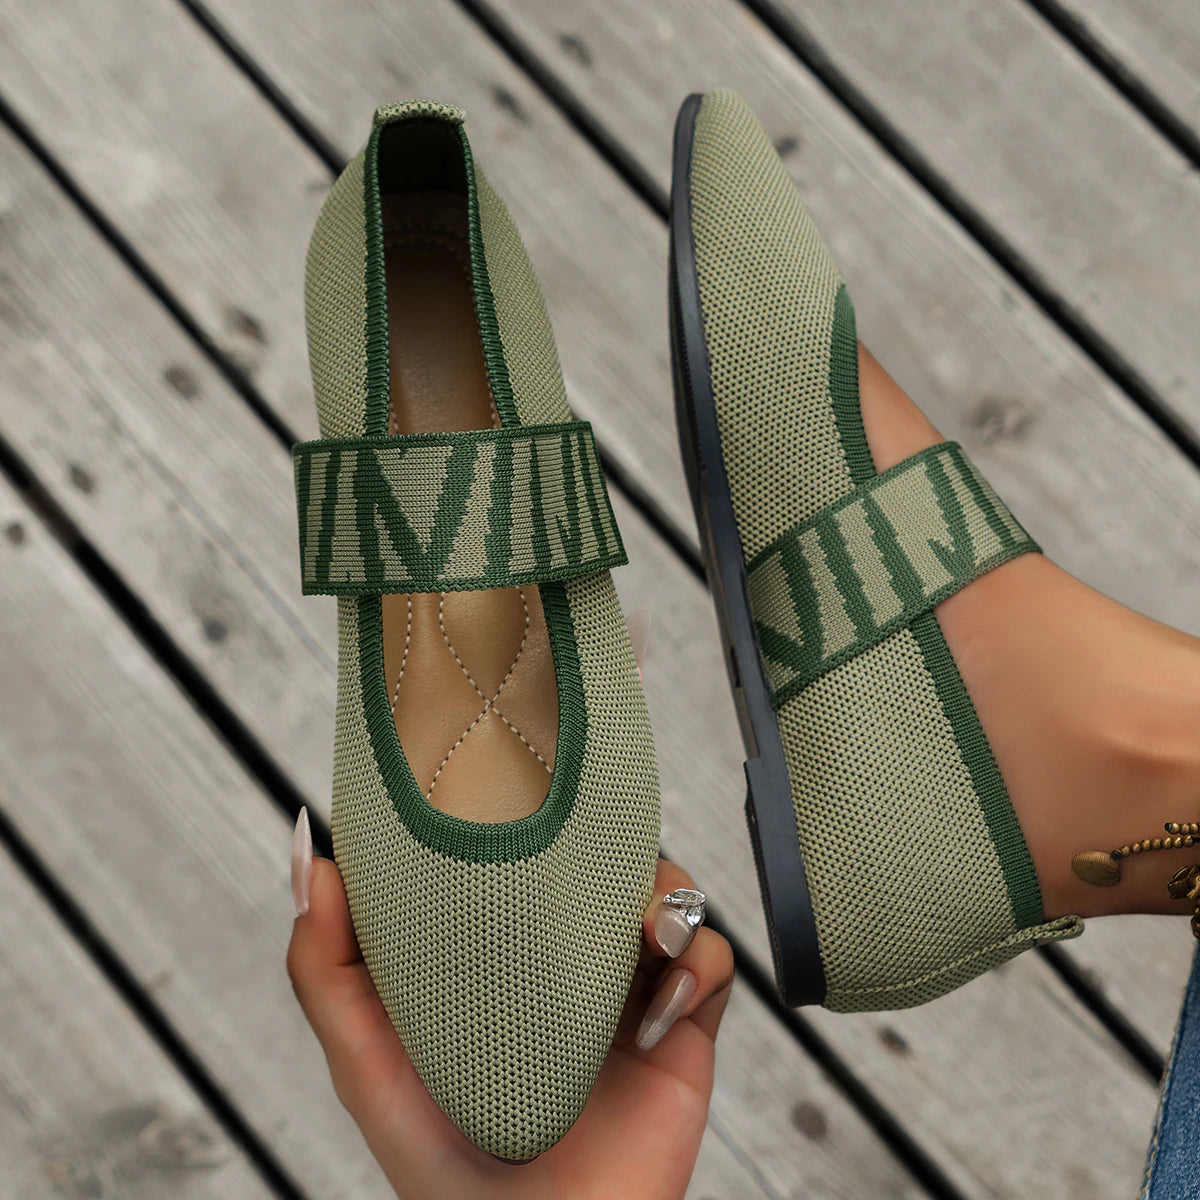 Knitted Color-block Women's Flat Shoes Dressy Ballet Flats Casual striped straps  Pointed Toe Loafers Female